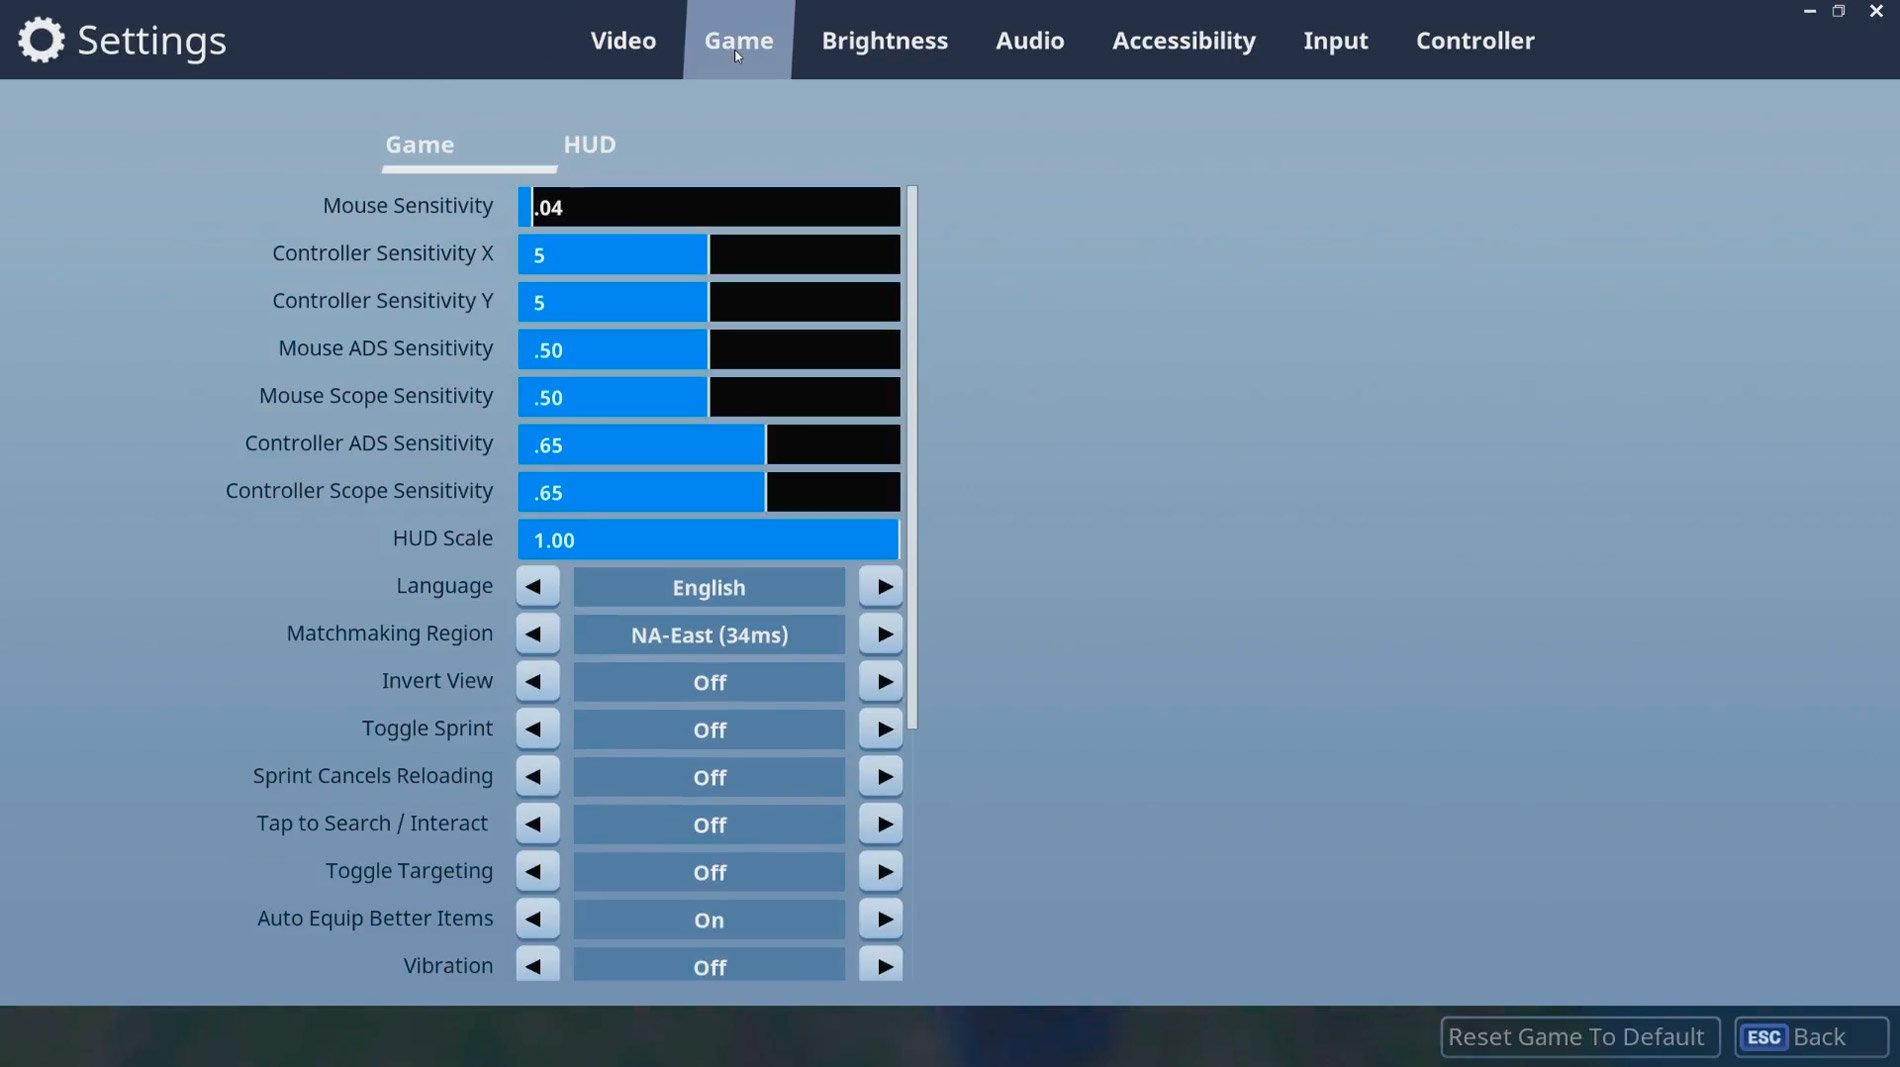 Drlupo Fortnite Settings Keybinds Config Gear 2019 - drlupo fortnite mouse settings